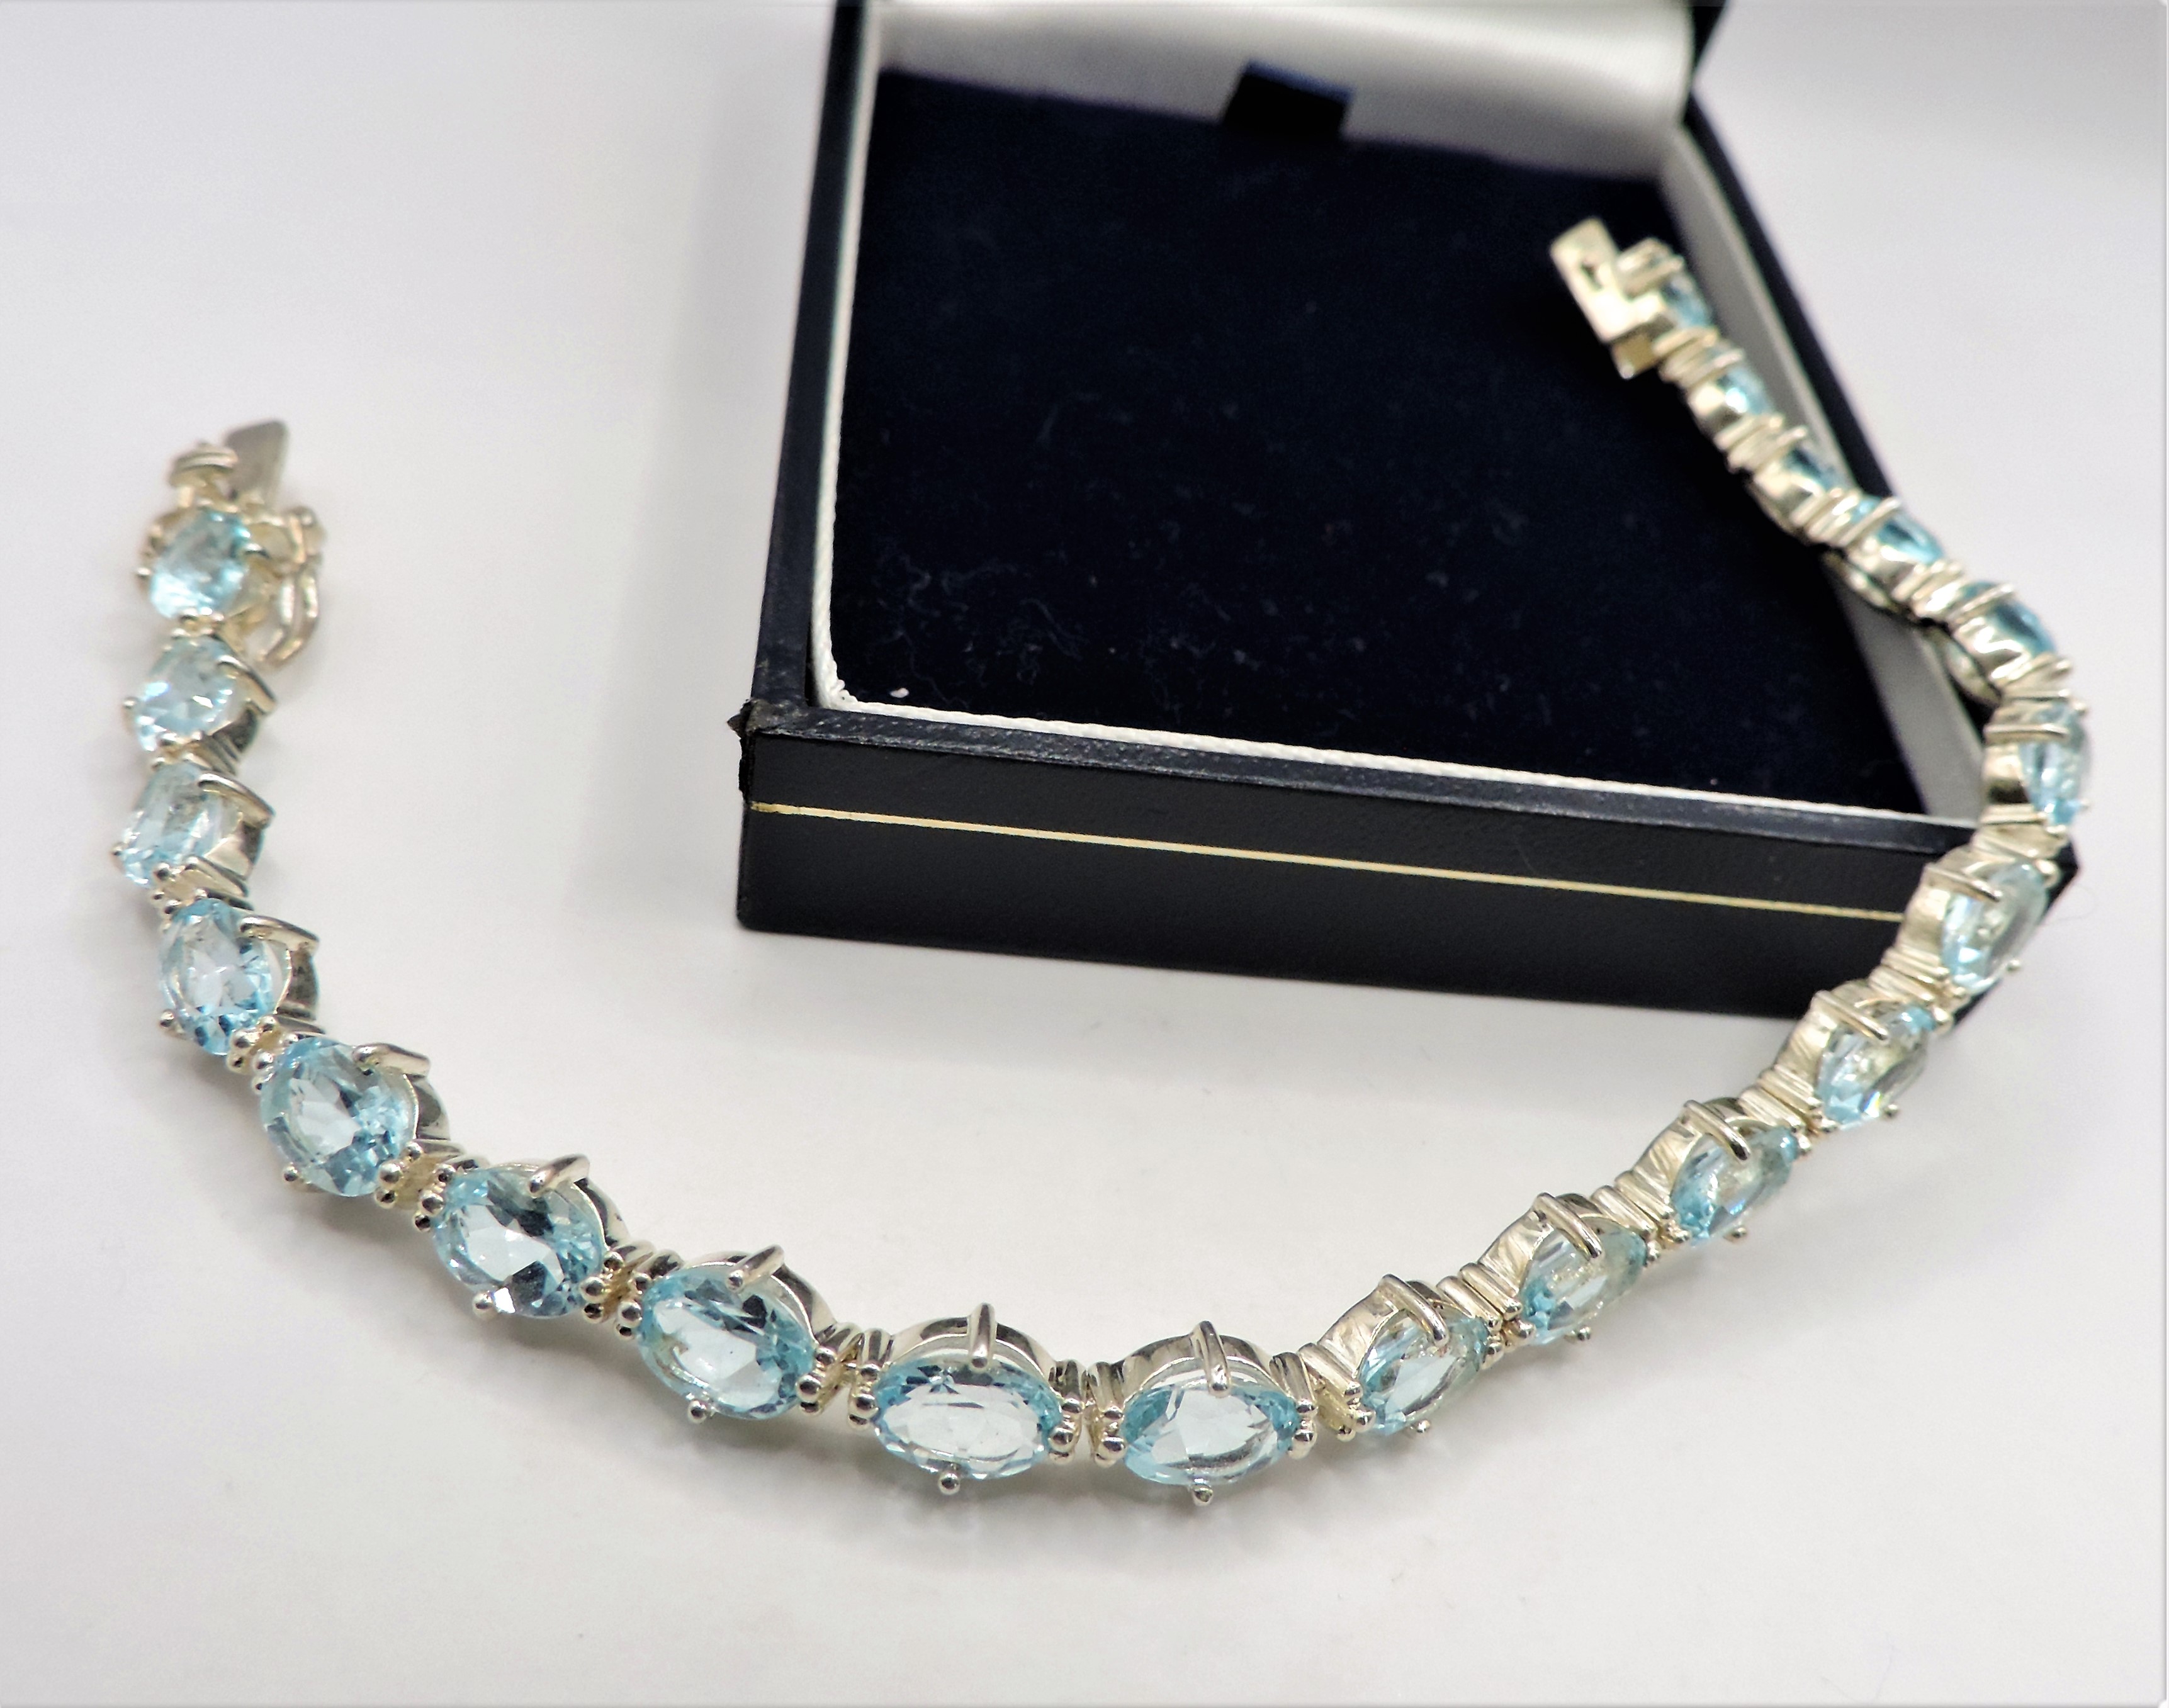 Sterling Silver 22CT Blue Topaz Bracelet 'New' with Gift Box - Image 4 of 6